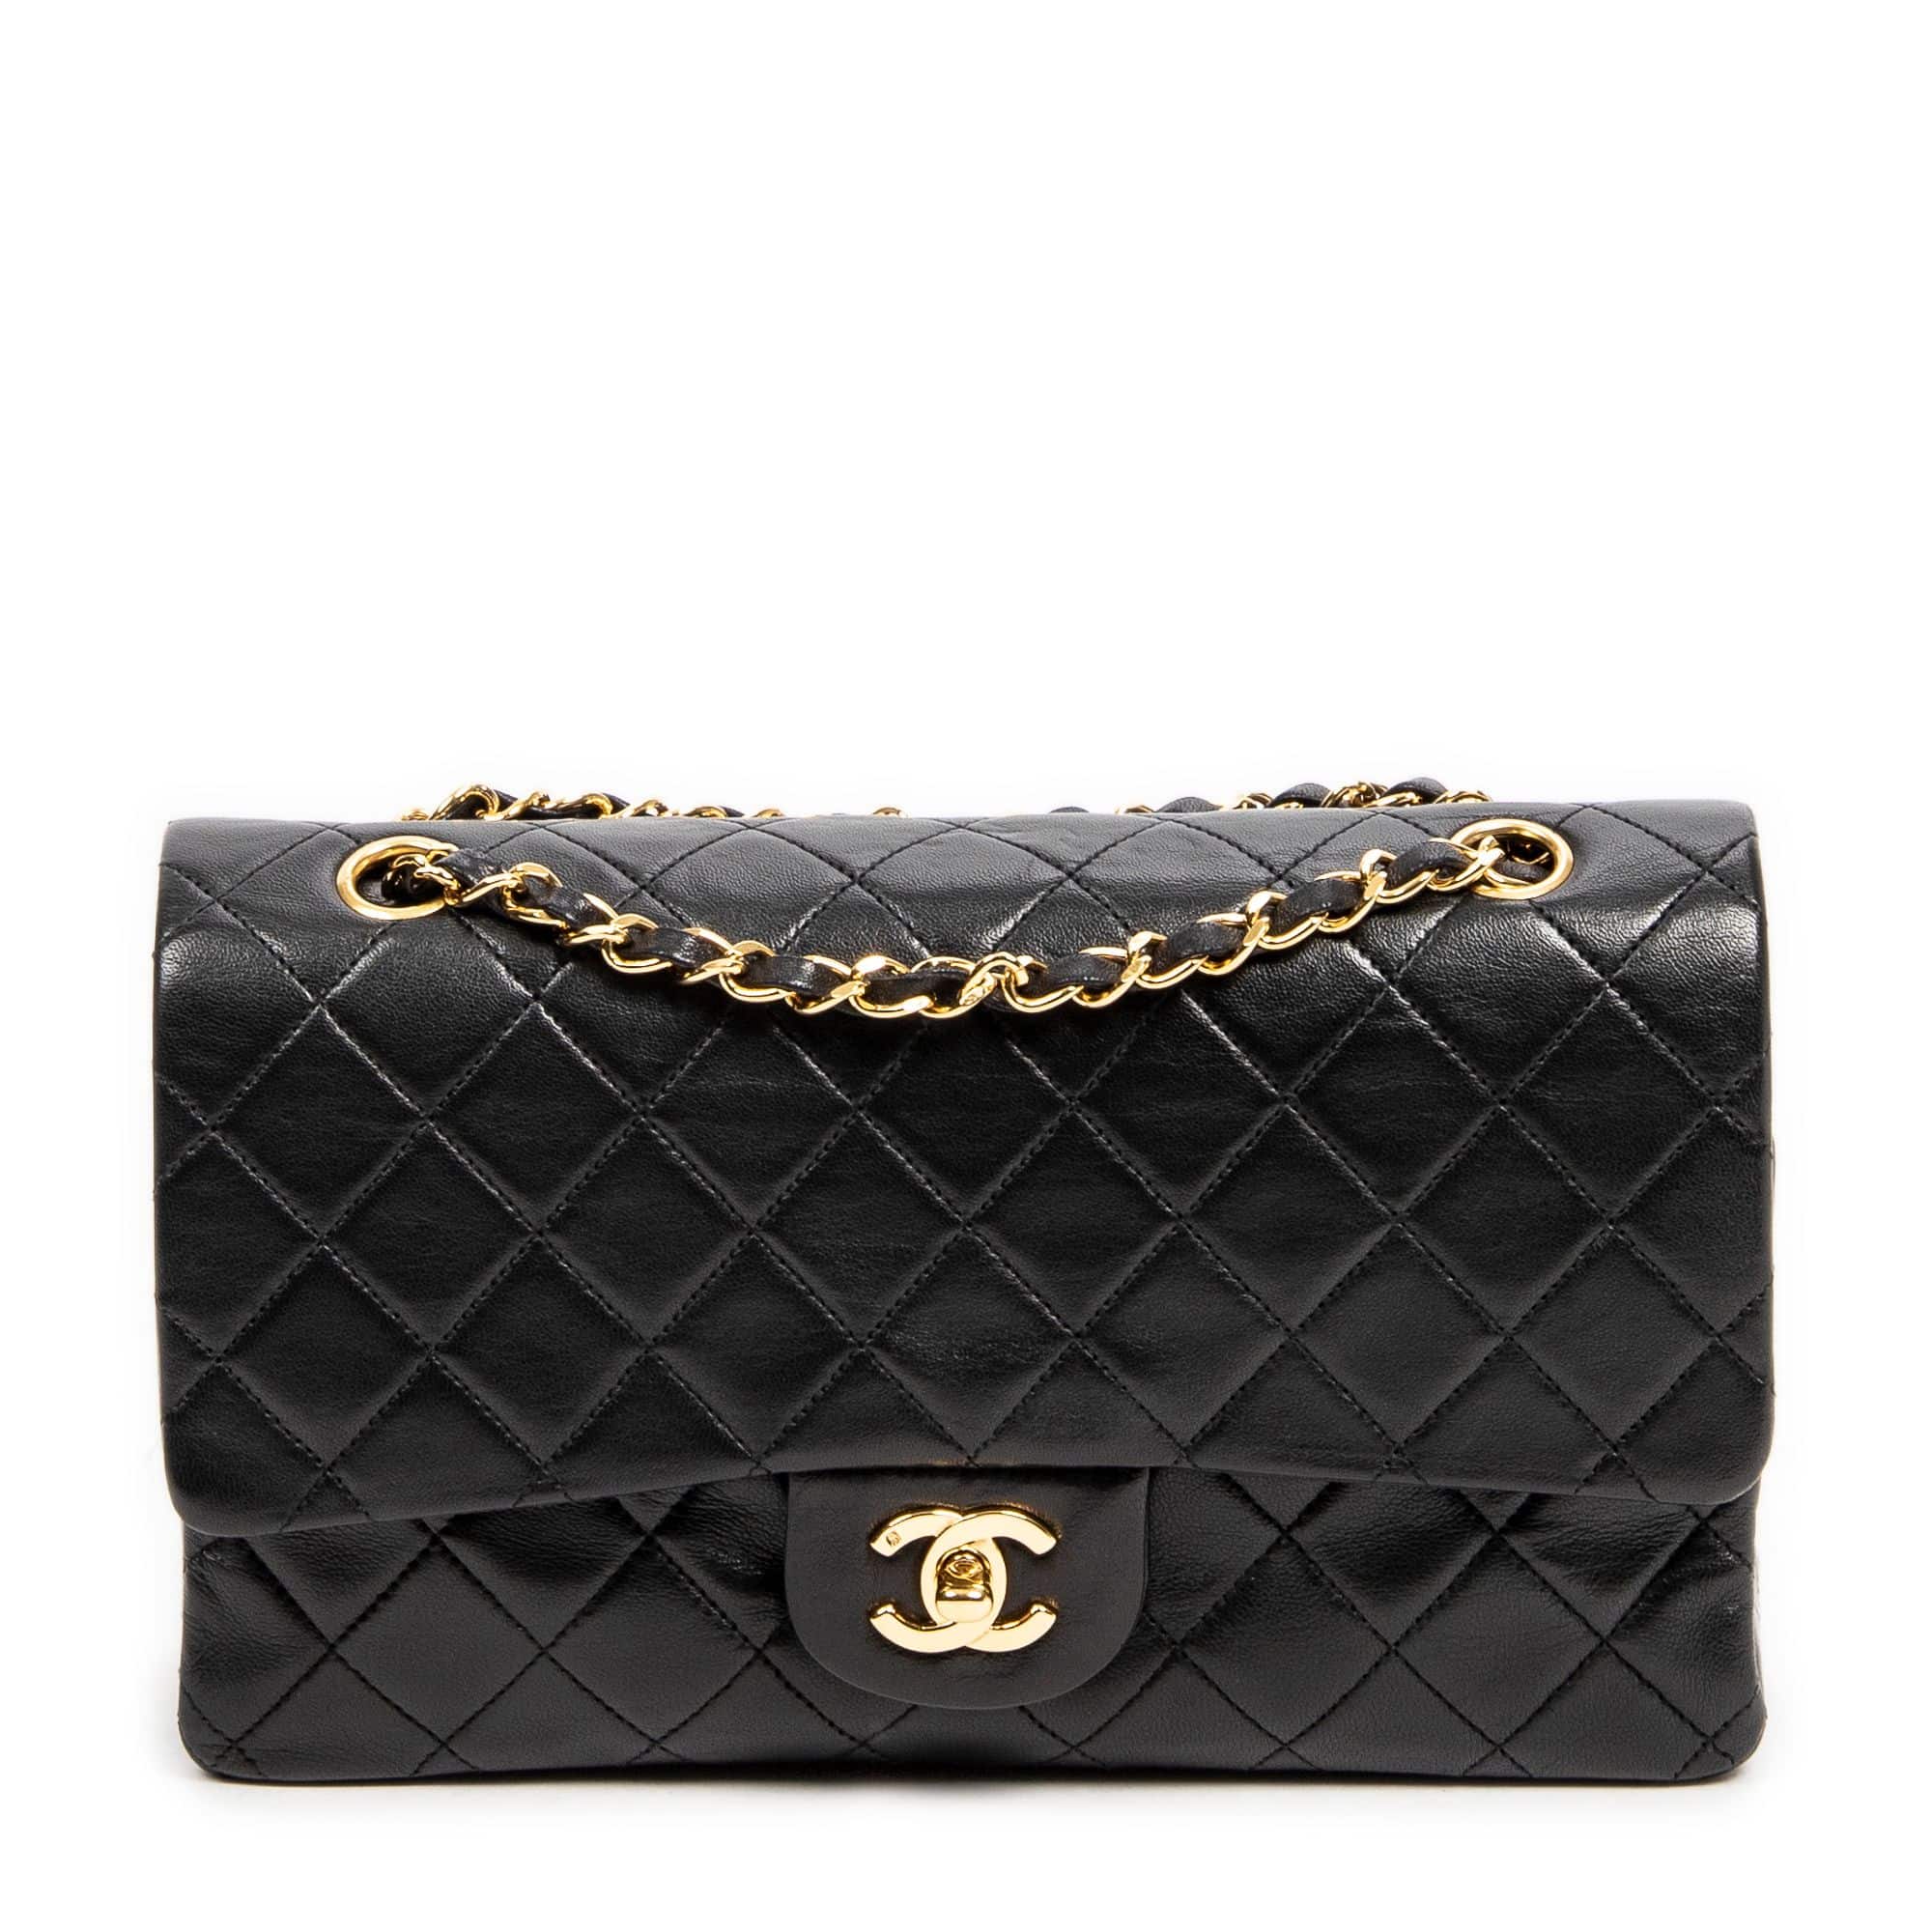 Chanel bags : a timeless investment - BrandCo Paris